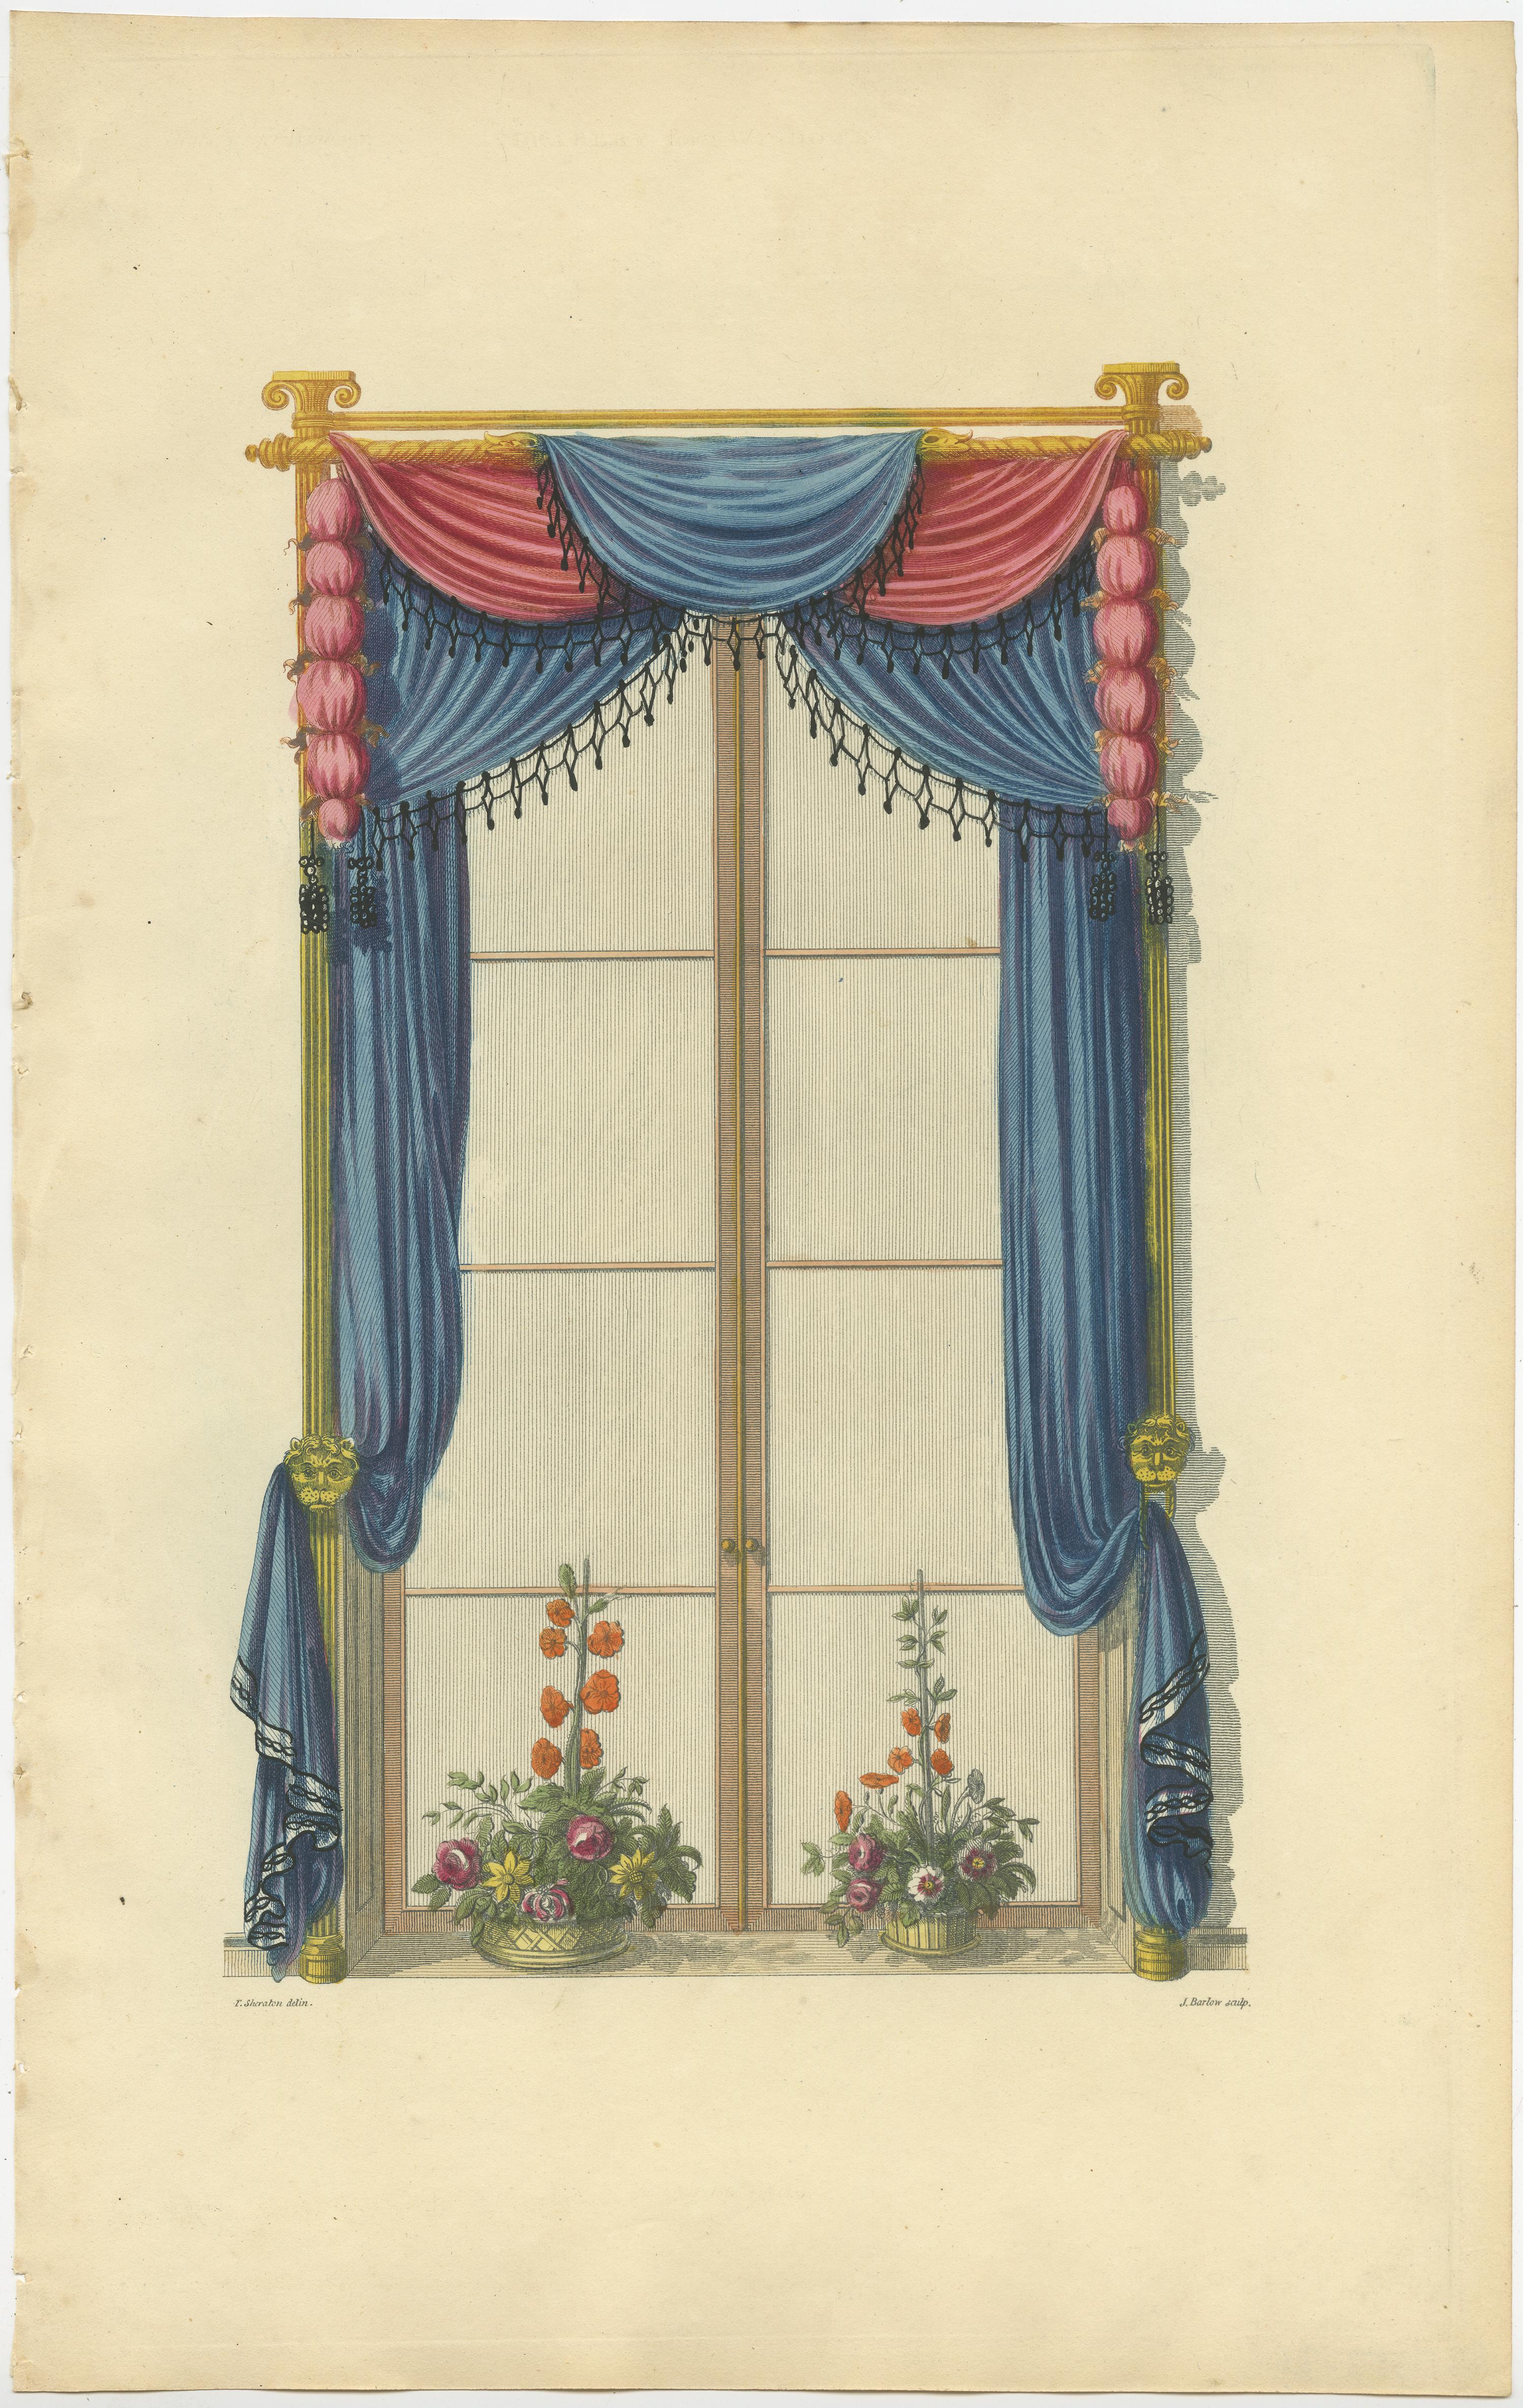 Paper Set of 4 Antique Prints of Windows with Drapery by Sheraton '1805' For Sale